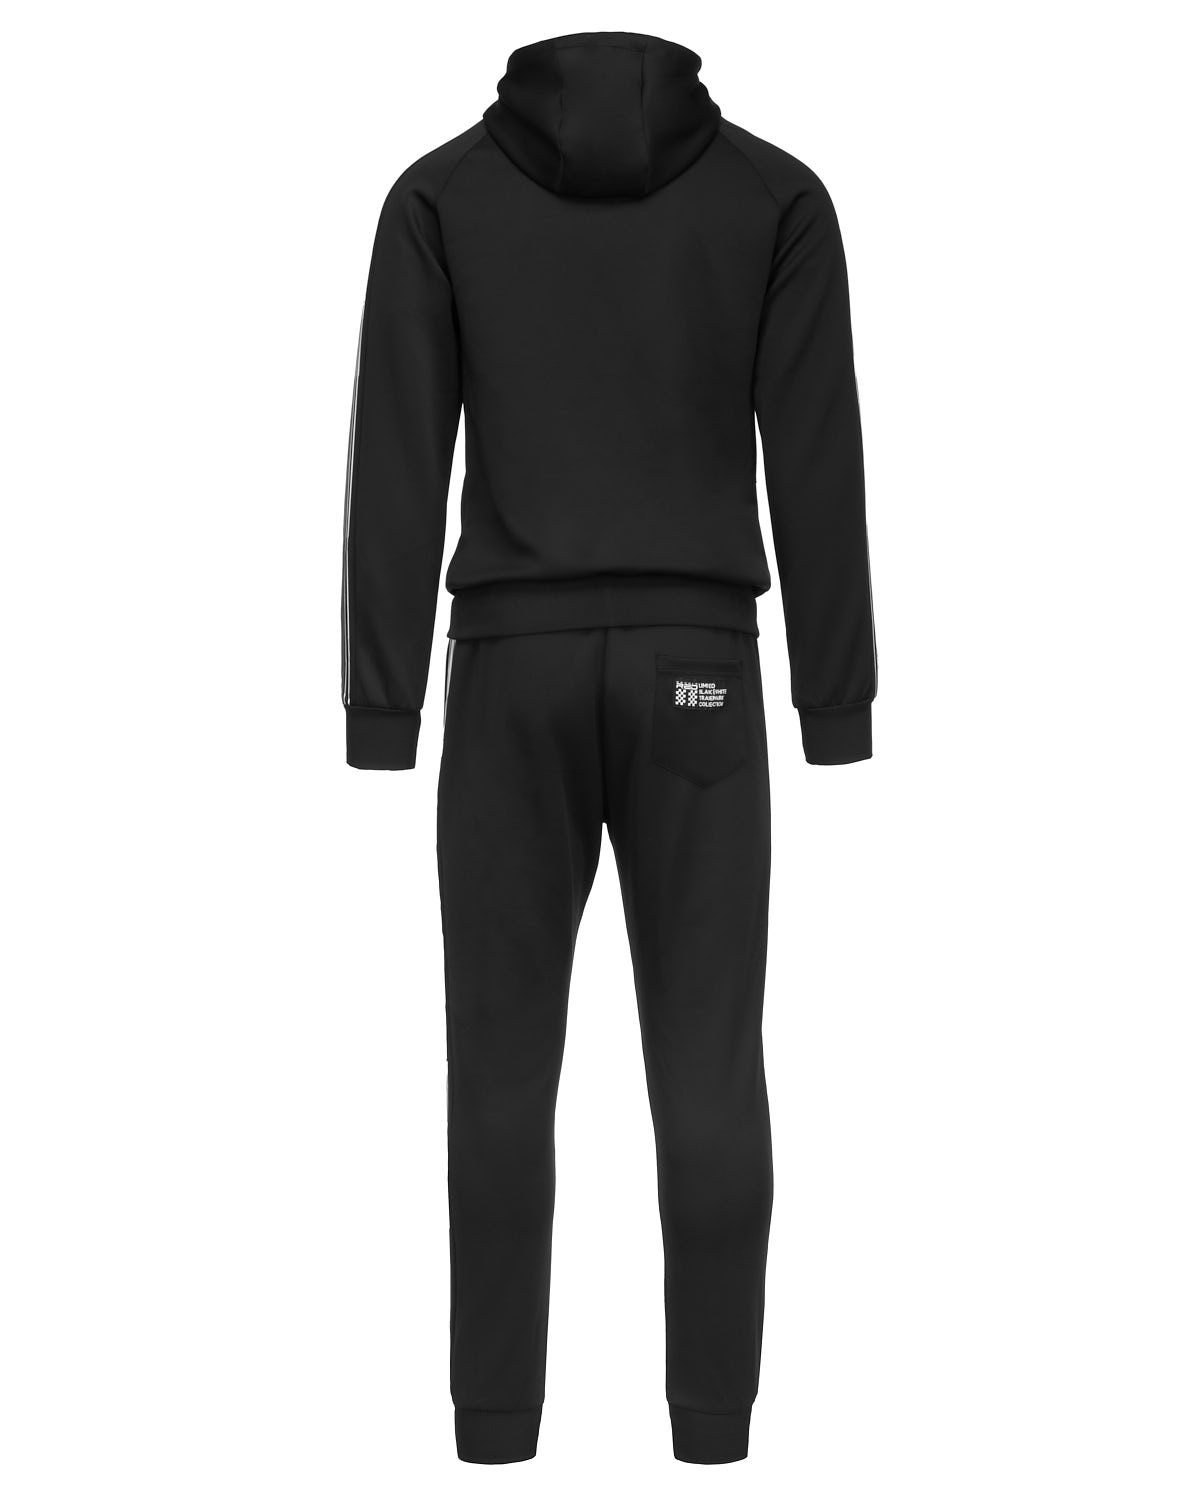 REFLEXERO SPORT IS YOUR GANG Tracksuit BW Edition